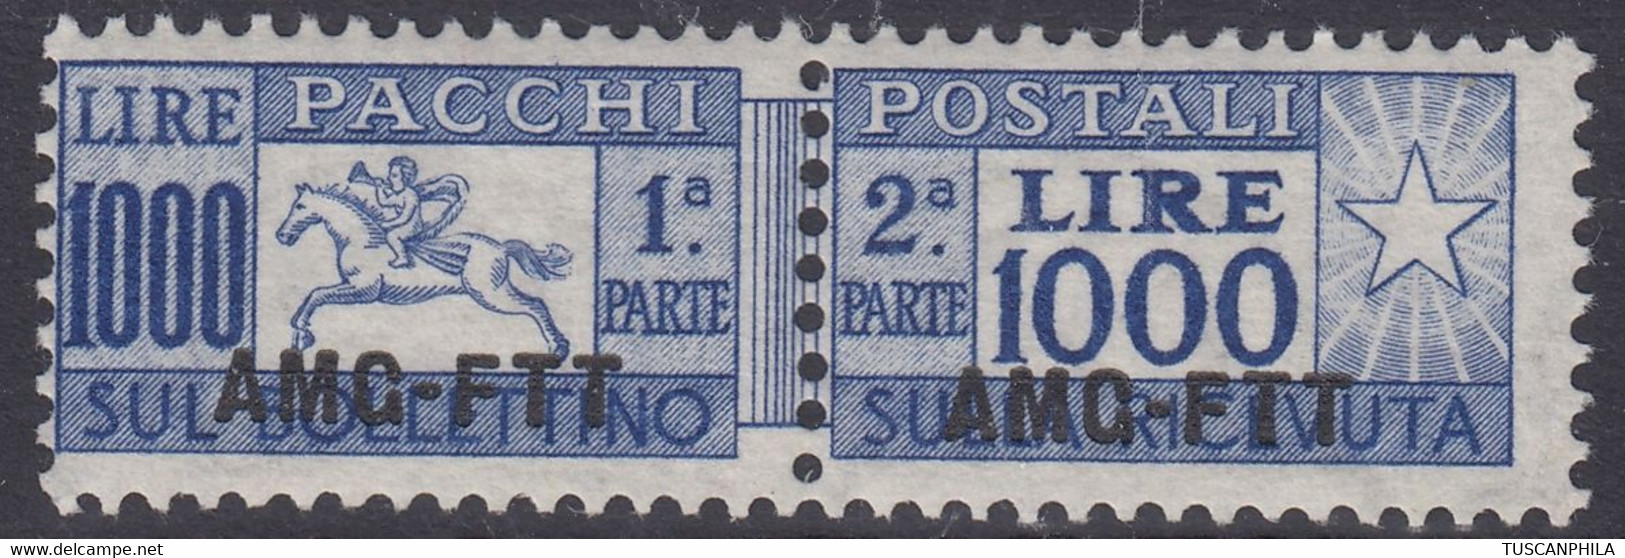 Trieste AMG-FTT Pacchi Postali Sass. 26 MNH** Cv. 250 - Postal And Consigned Parcels